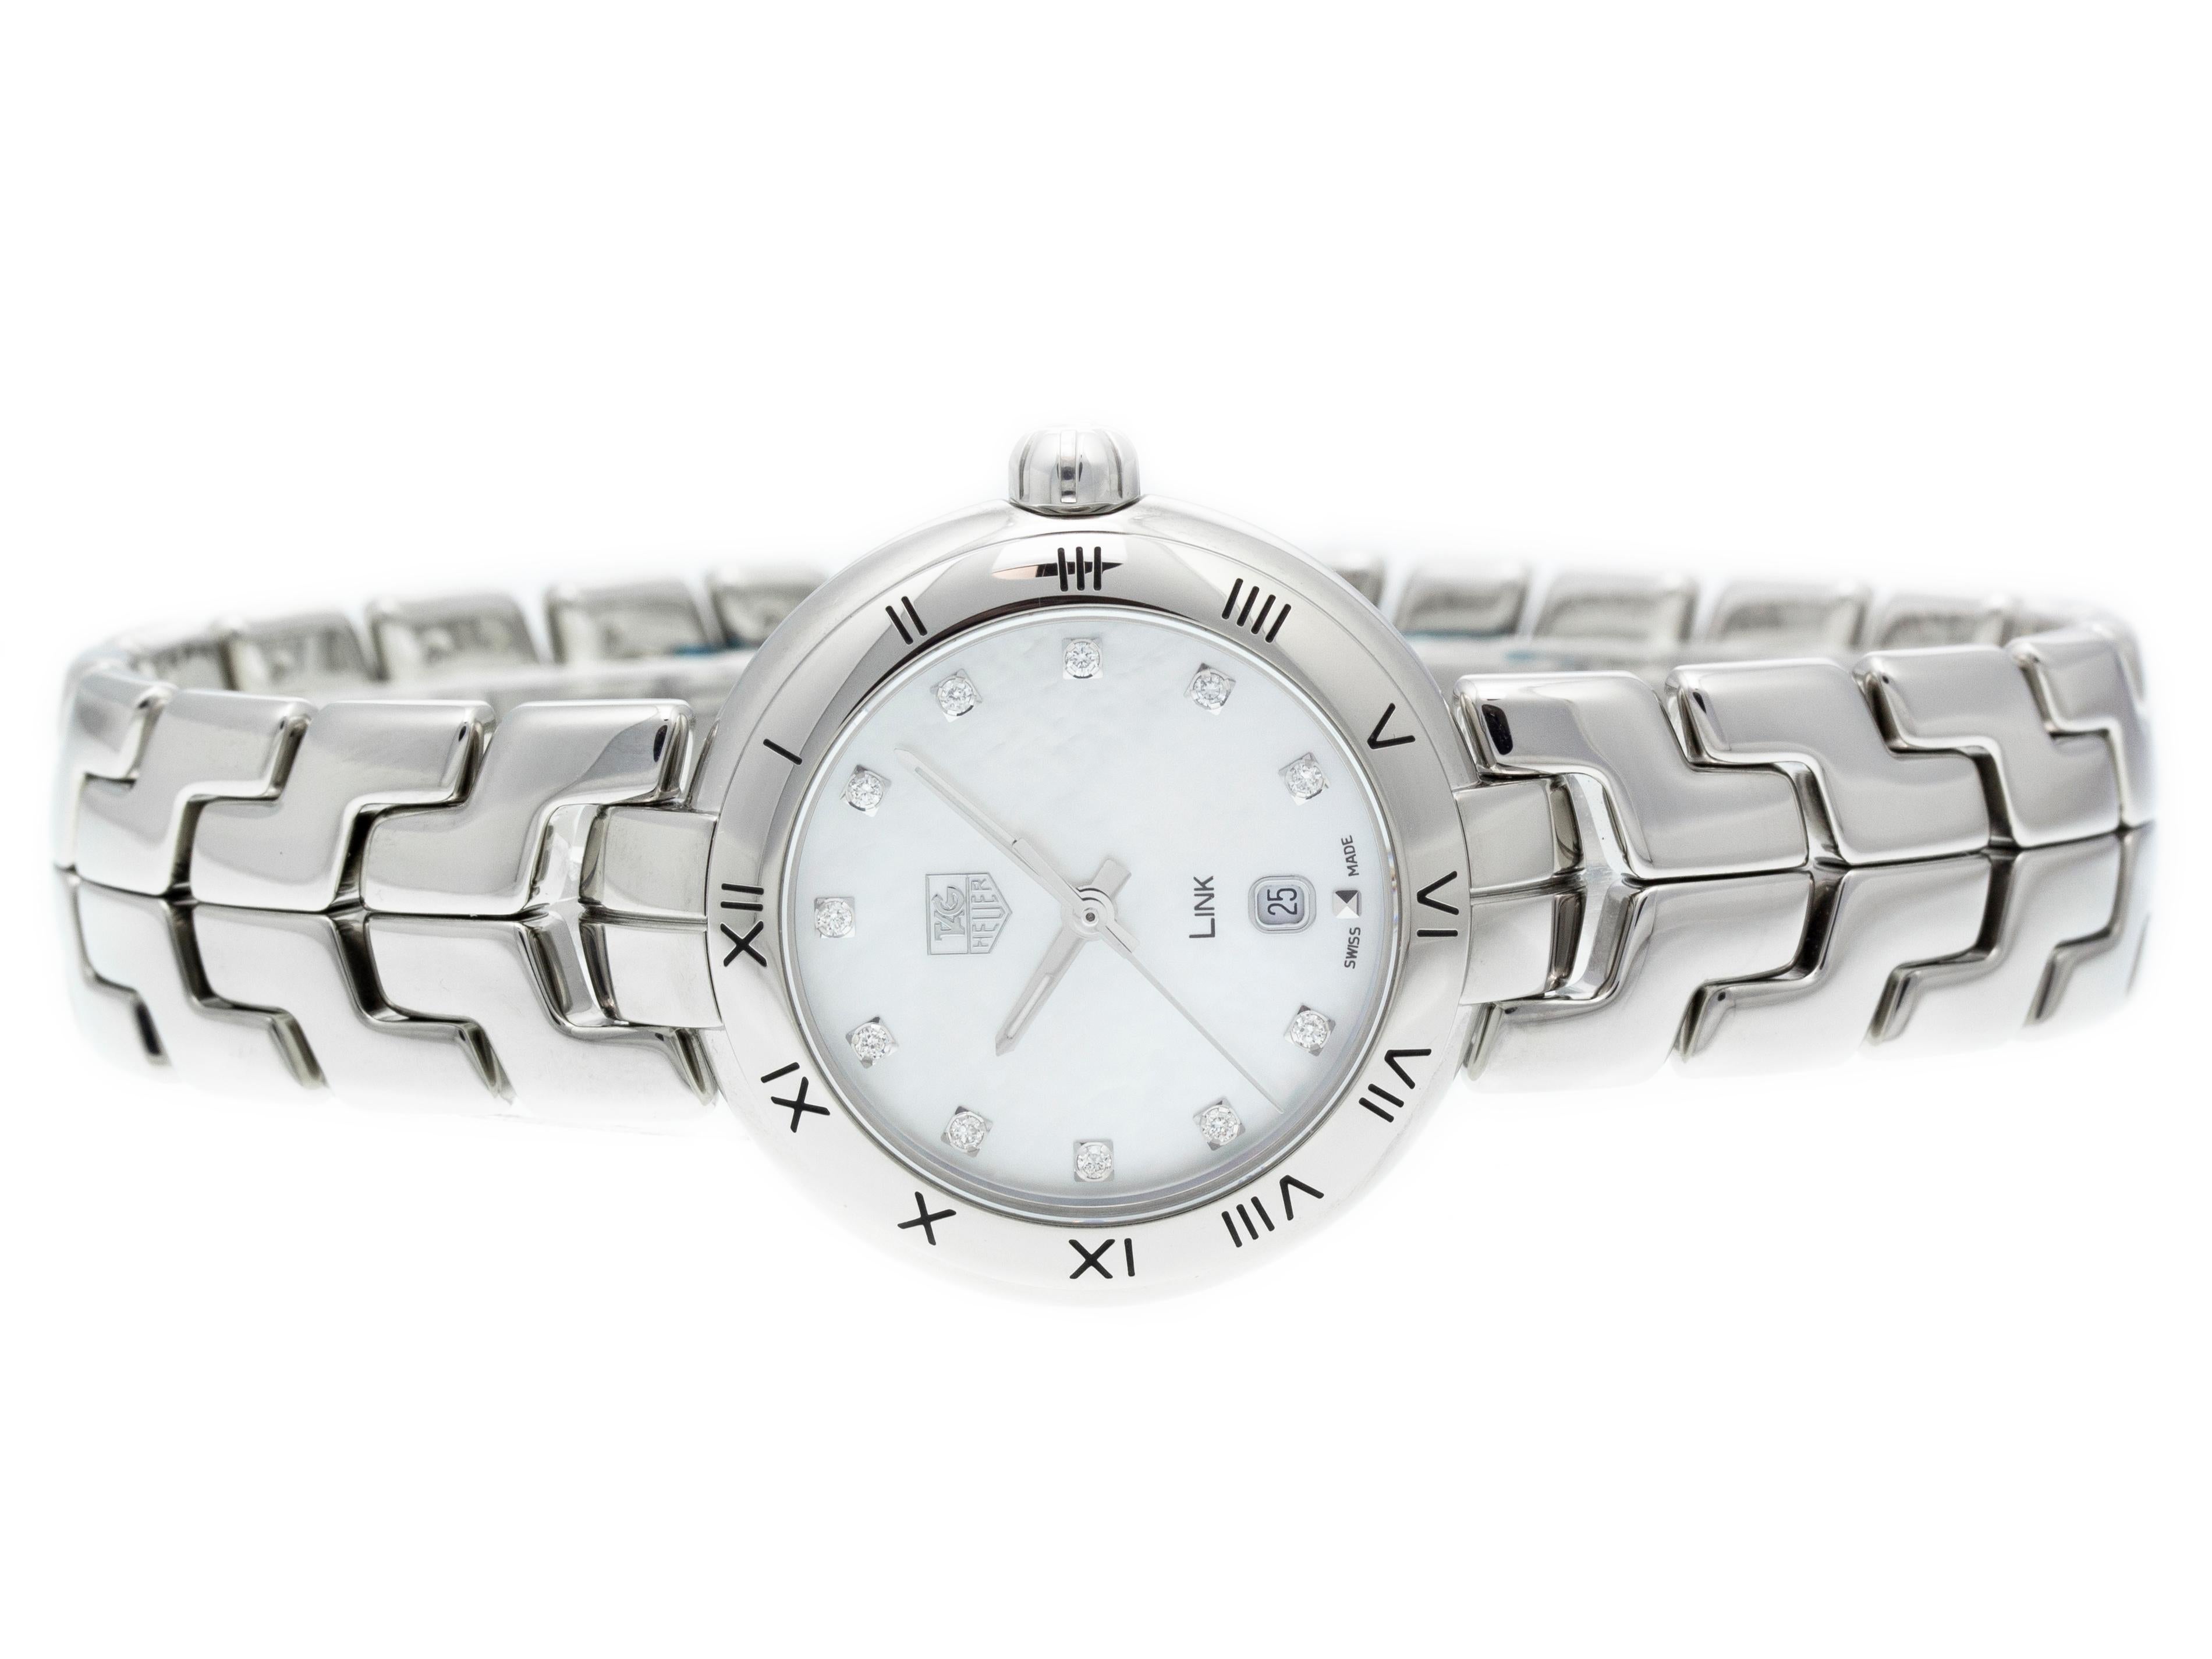 Stainless steel Tag Heuer Link quartz watch with a 29mm case, MOP diamond dial, and bracelet with folding clasp. Features include hours, minutes, seconds, and date. Comes with a Tag Box and 2 Year Store Warranty.​


Brand	Tag